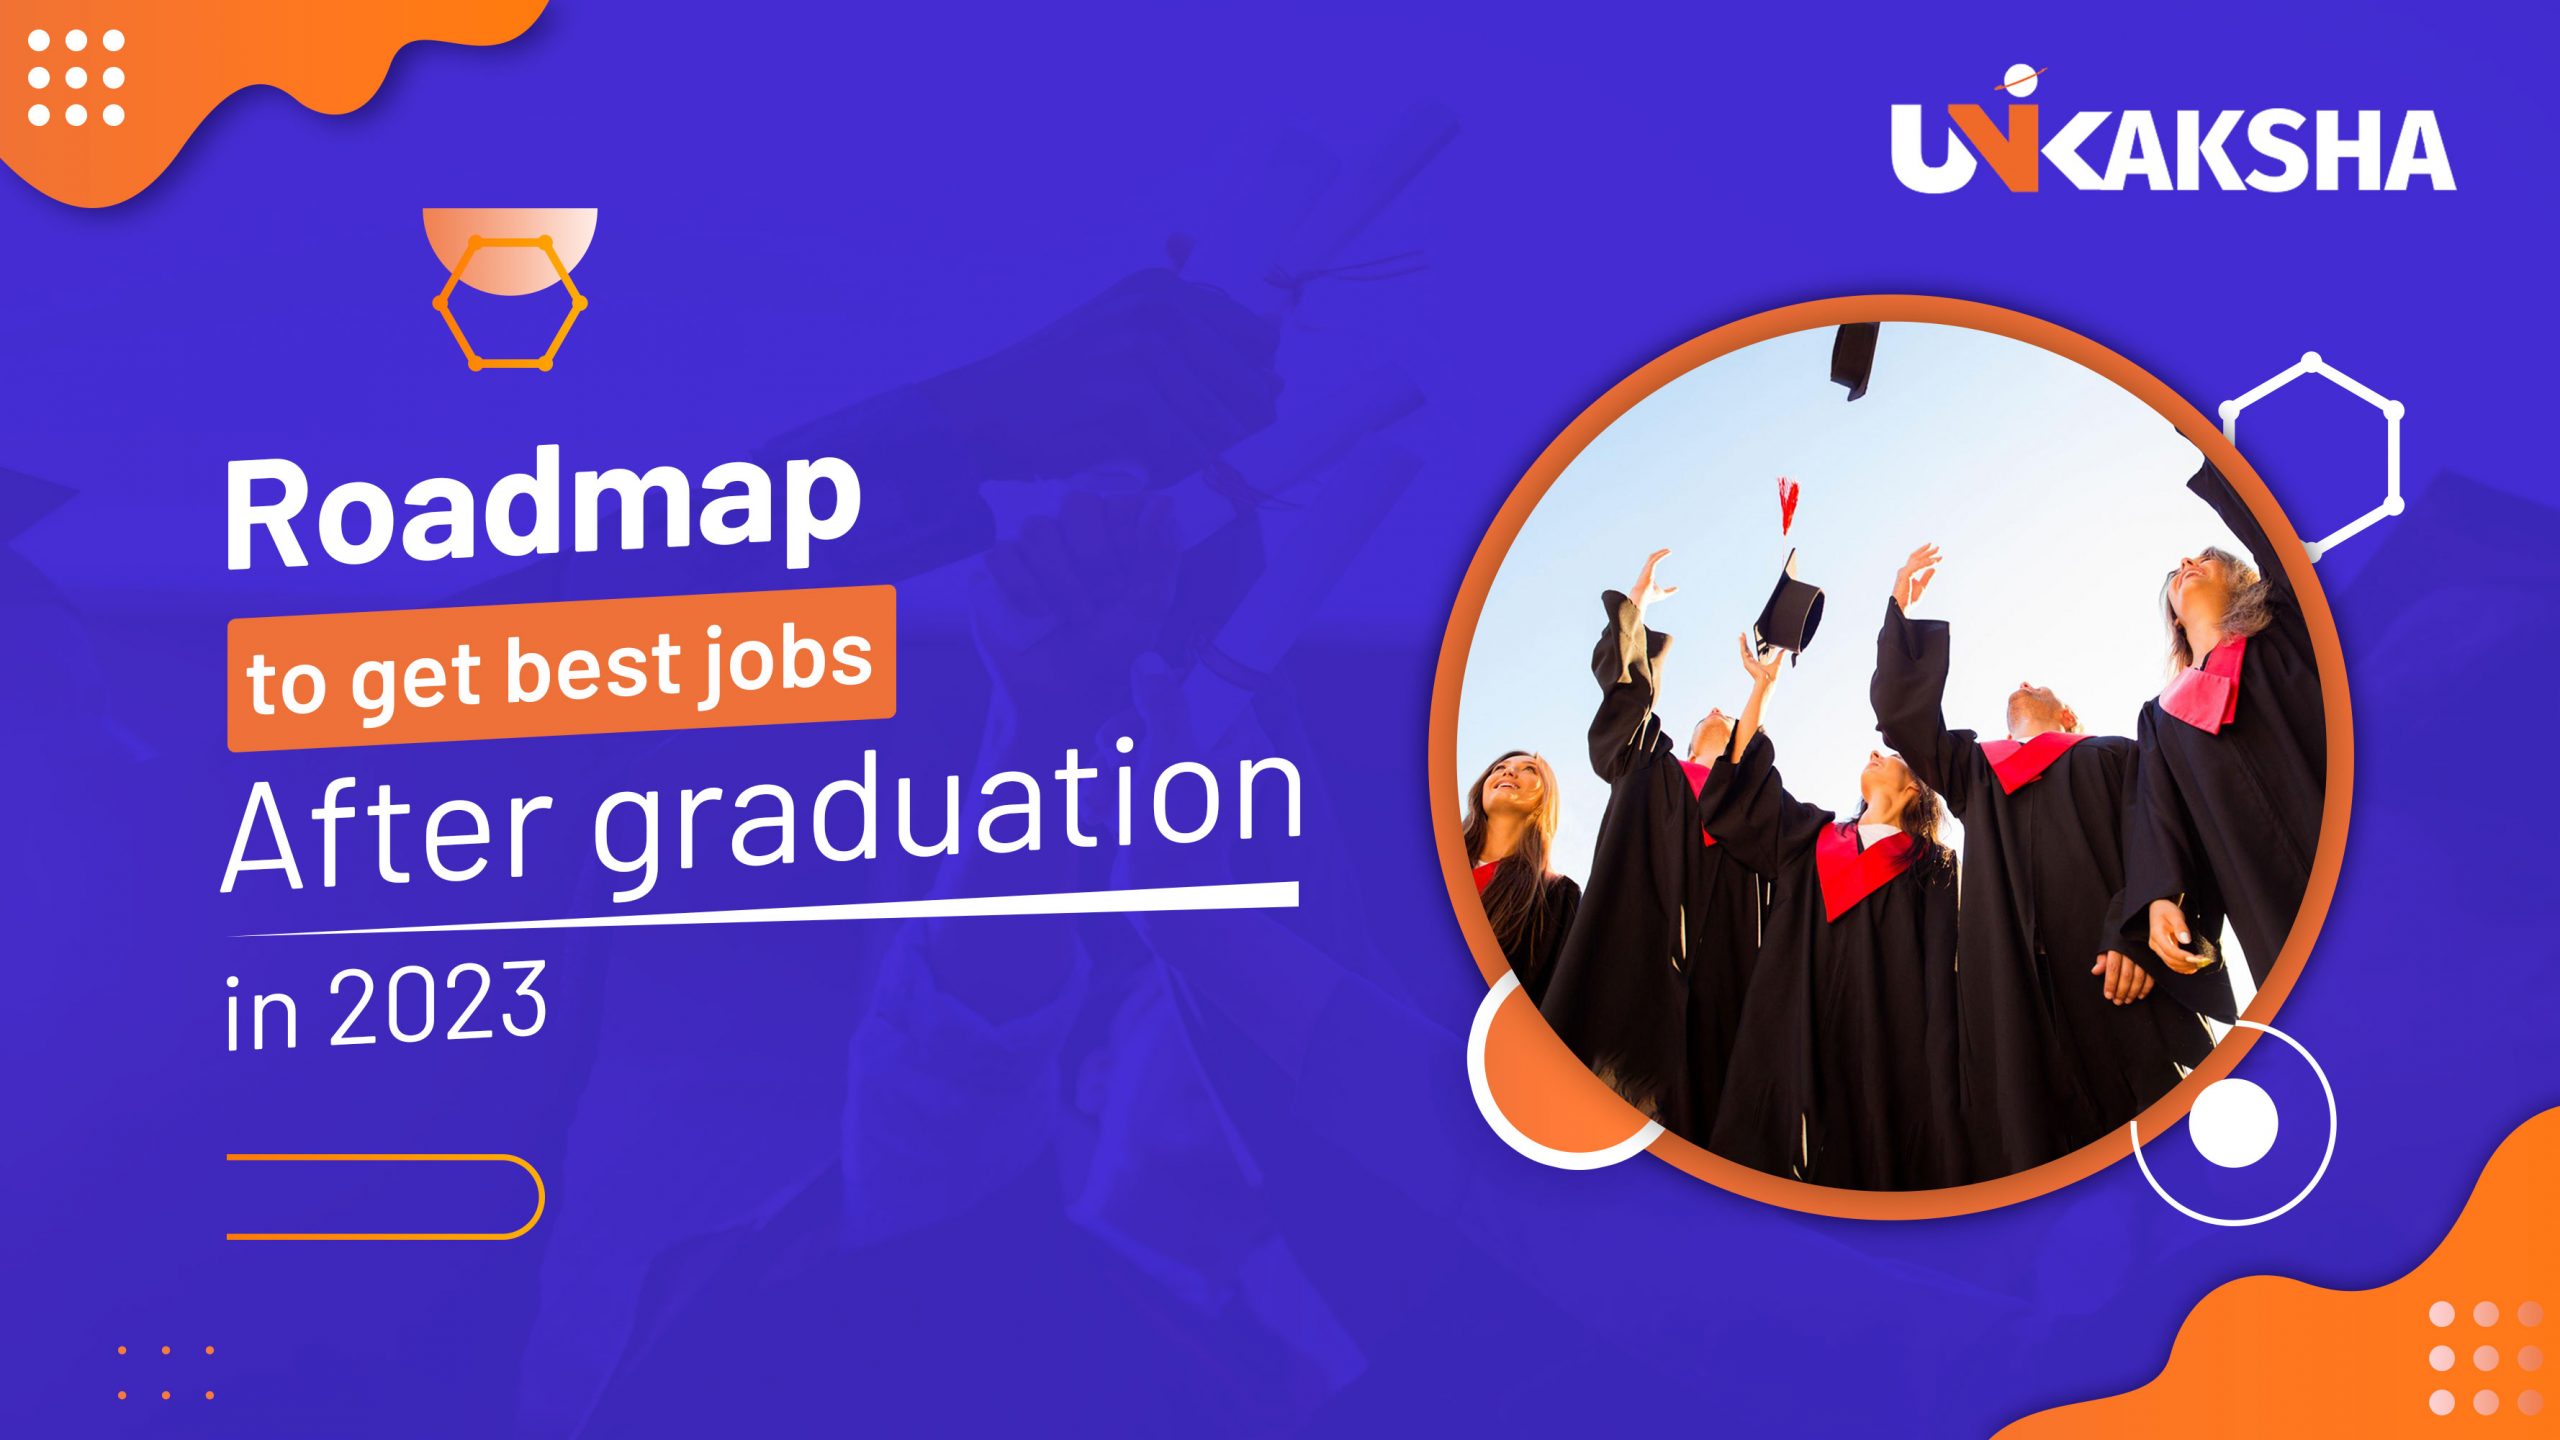 Roadmap to get the best jobs after graduation in 2023